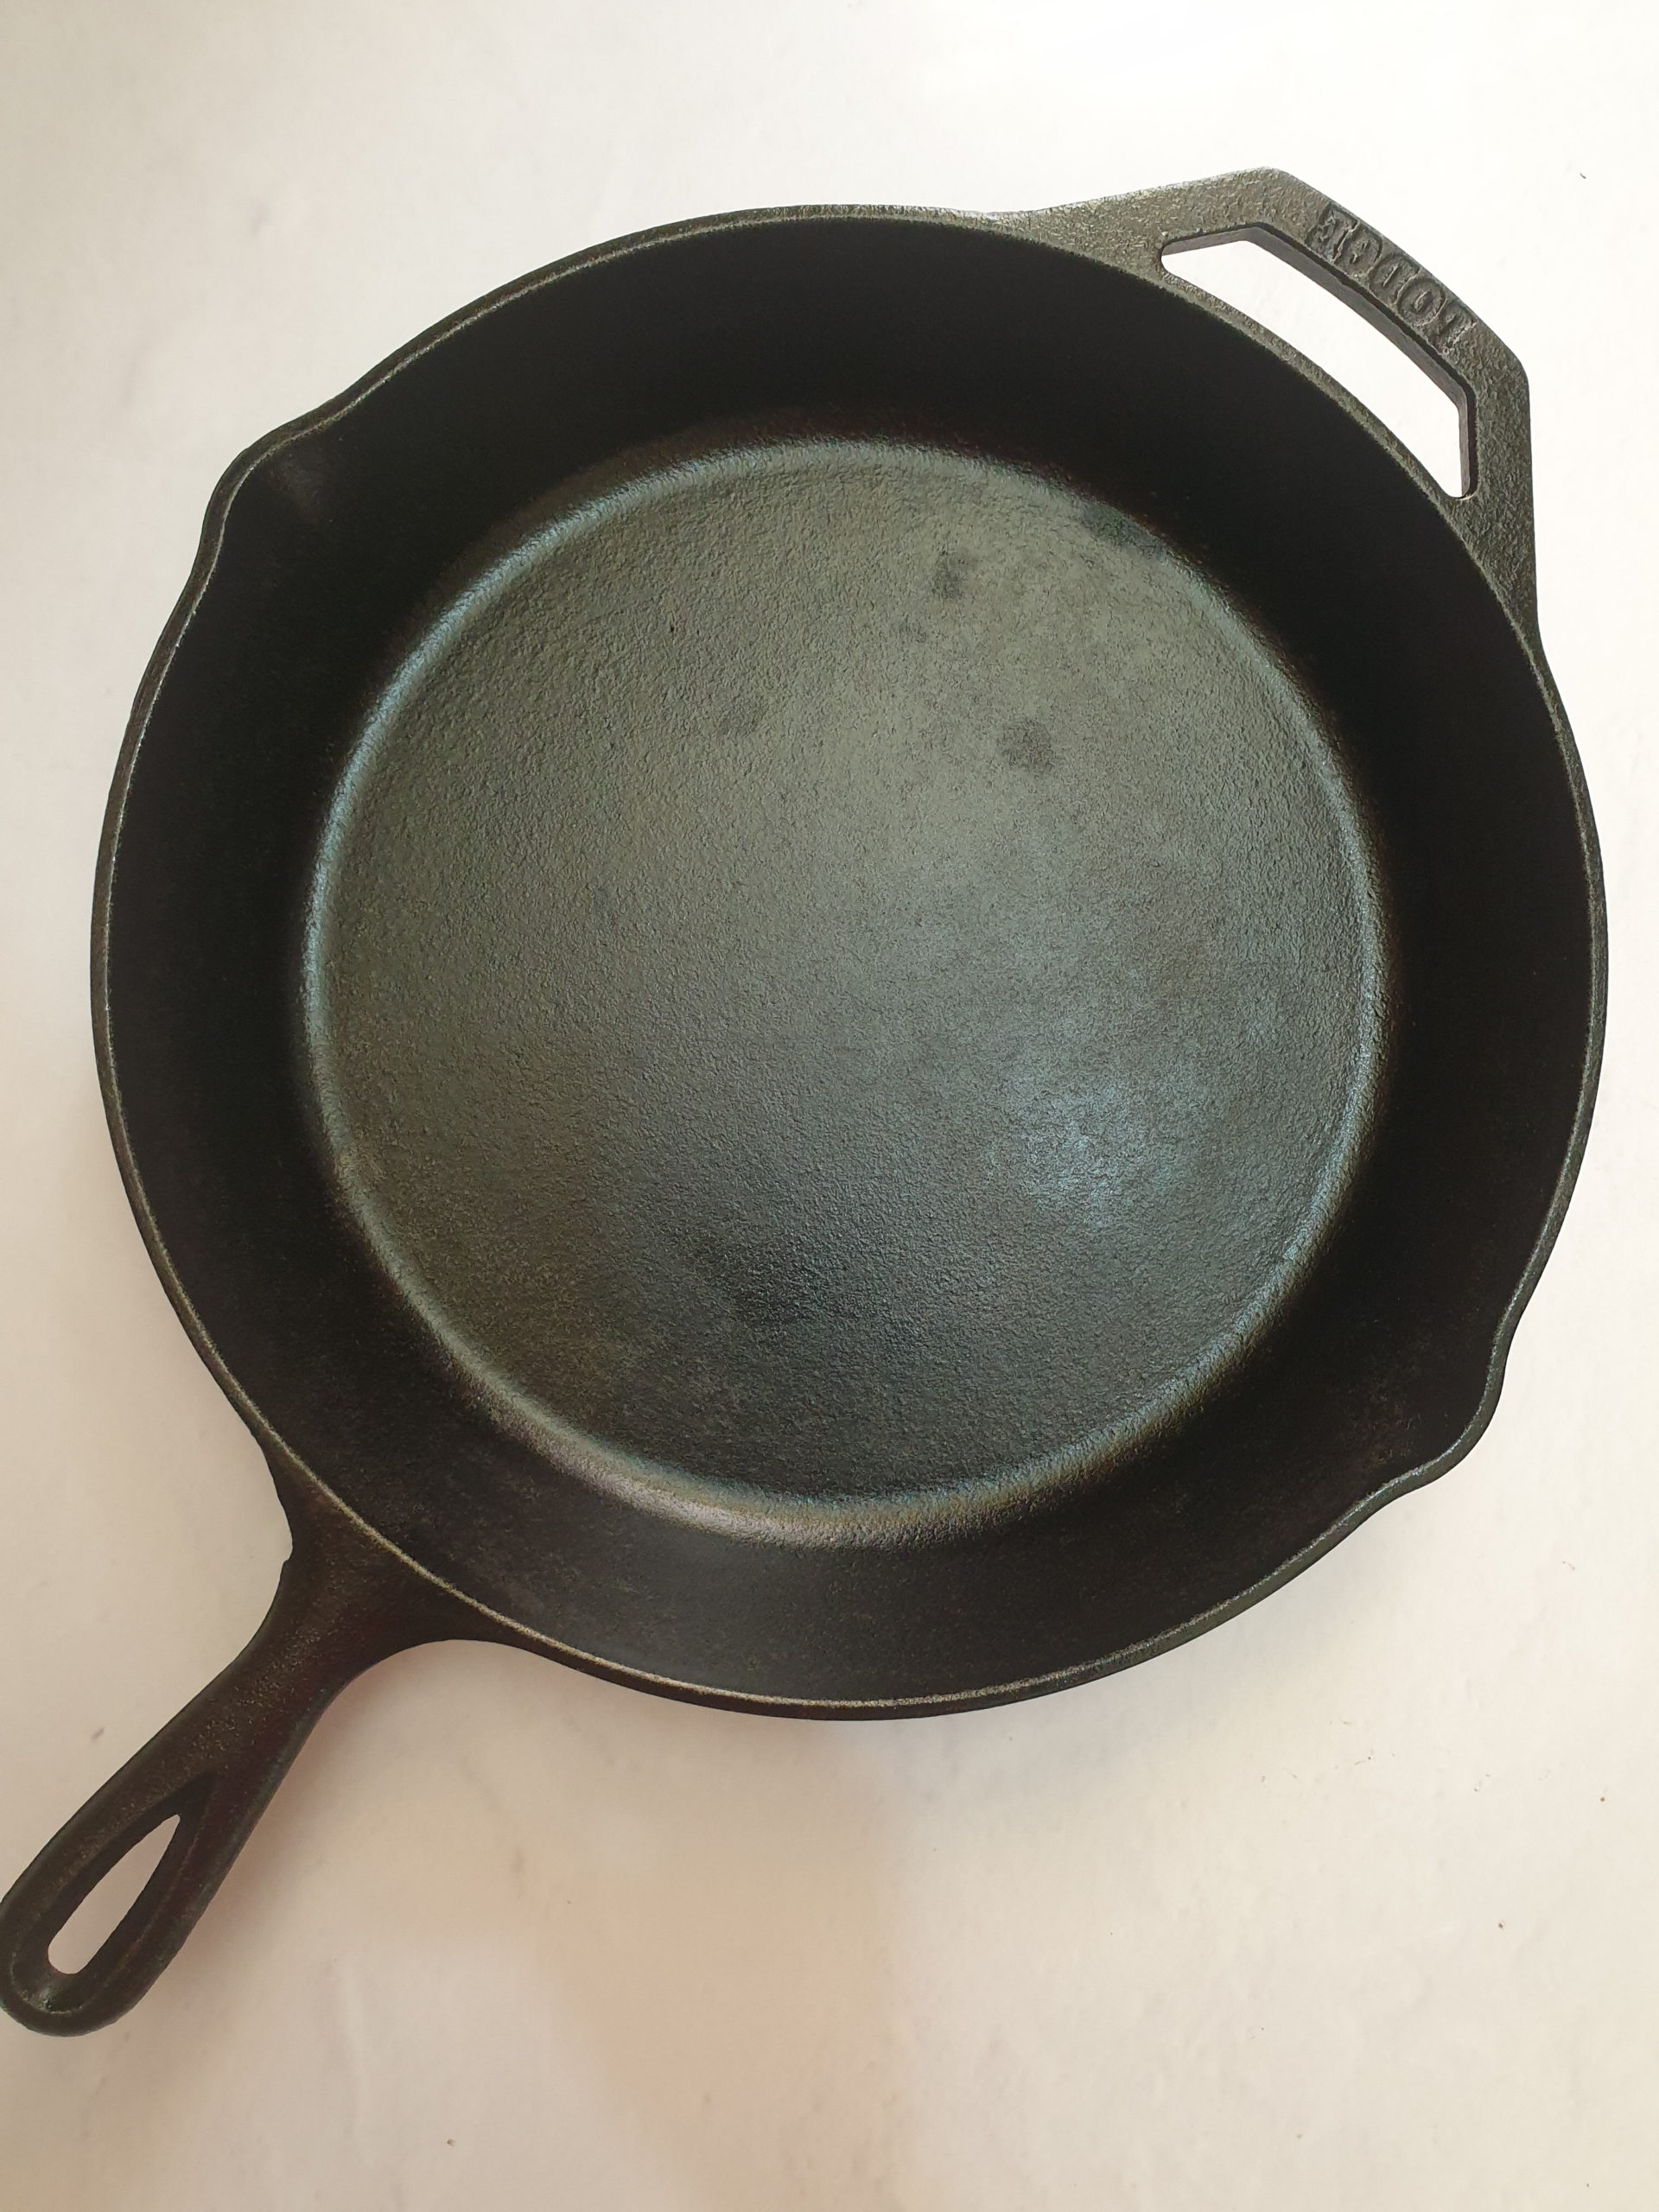 How to Clean & Season a Cast Iron Skillet